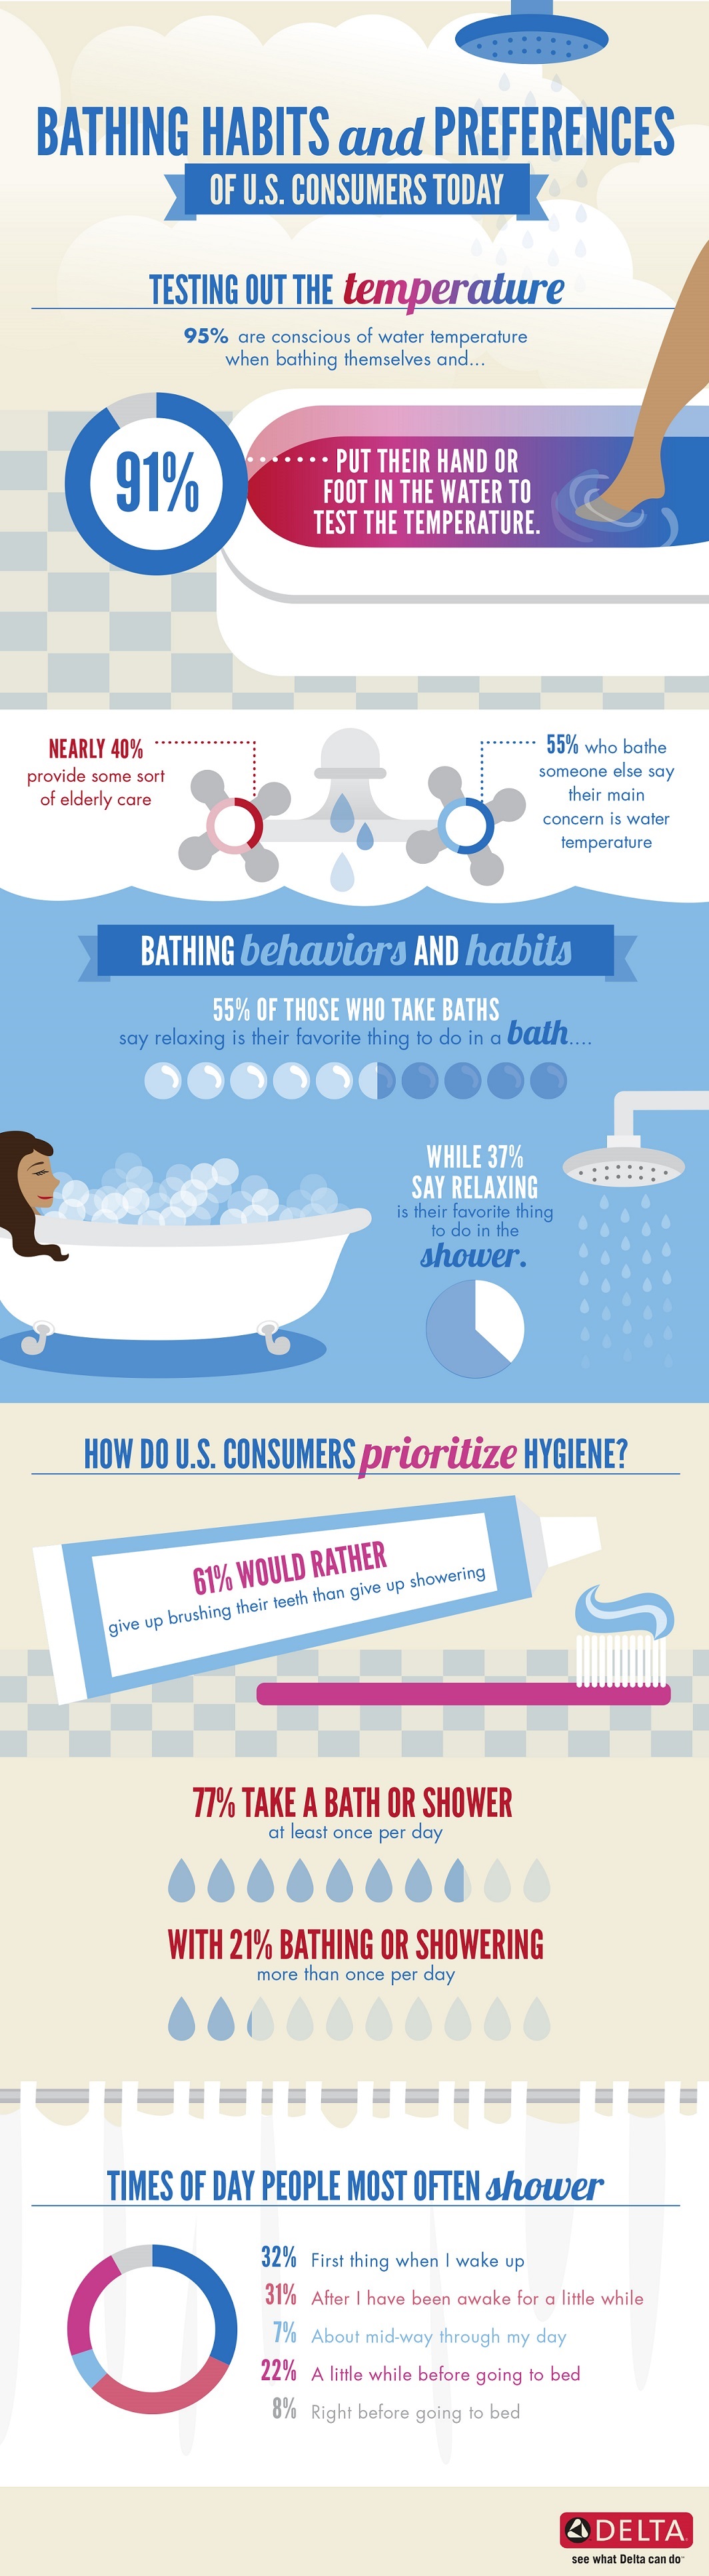 Infographic detailing bathing habits and preferences of U.S. consumers